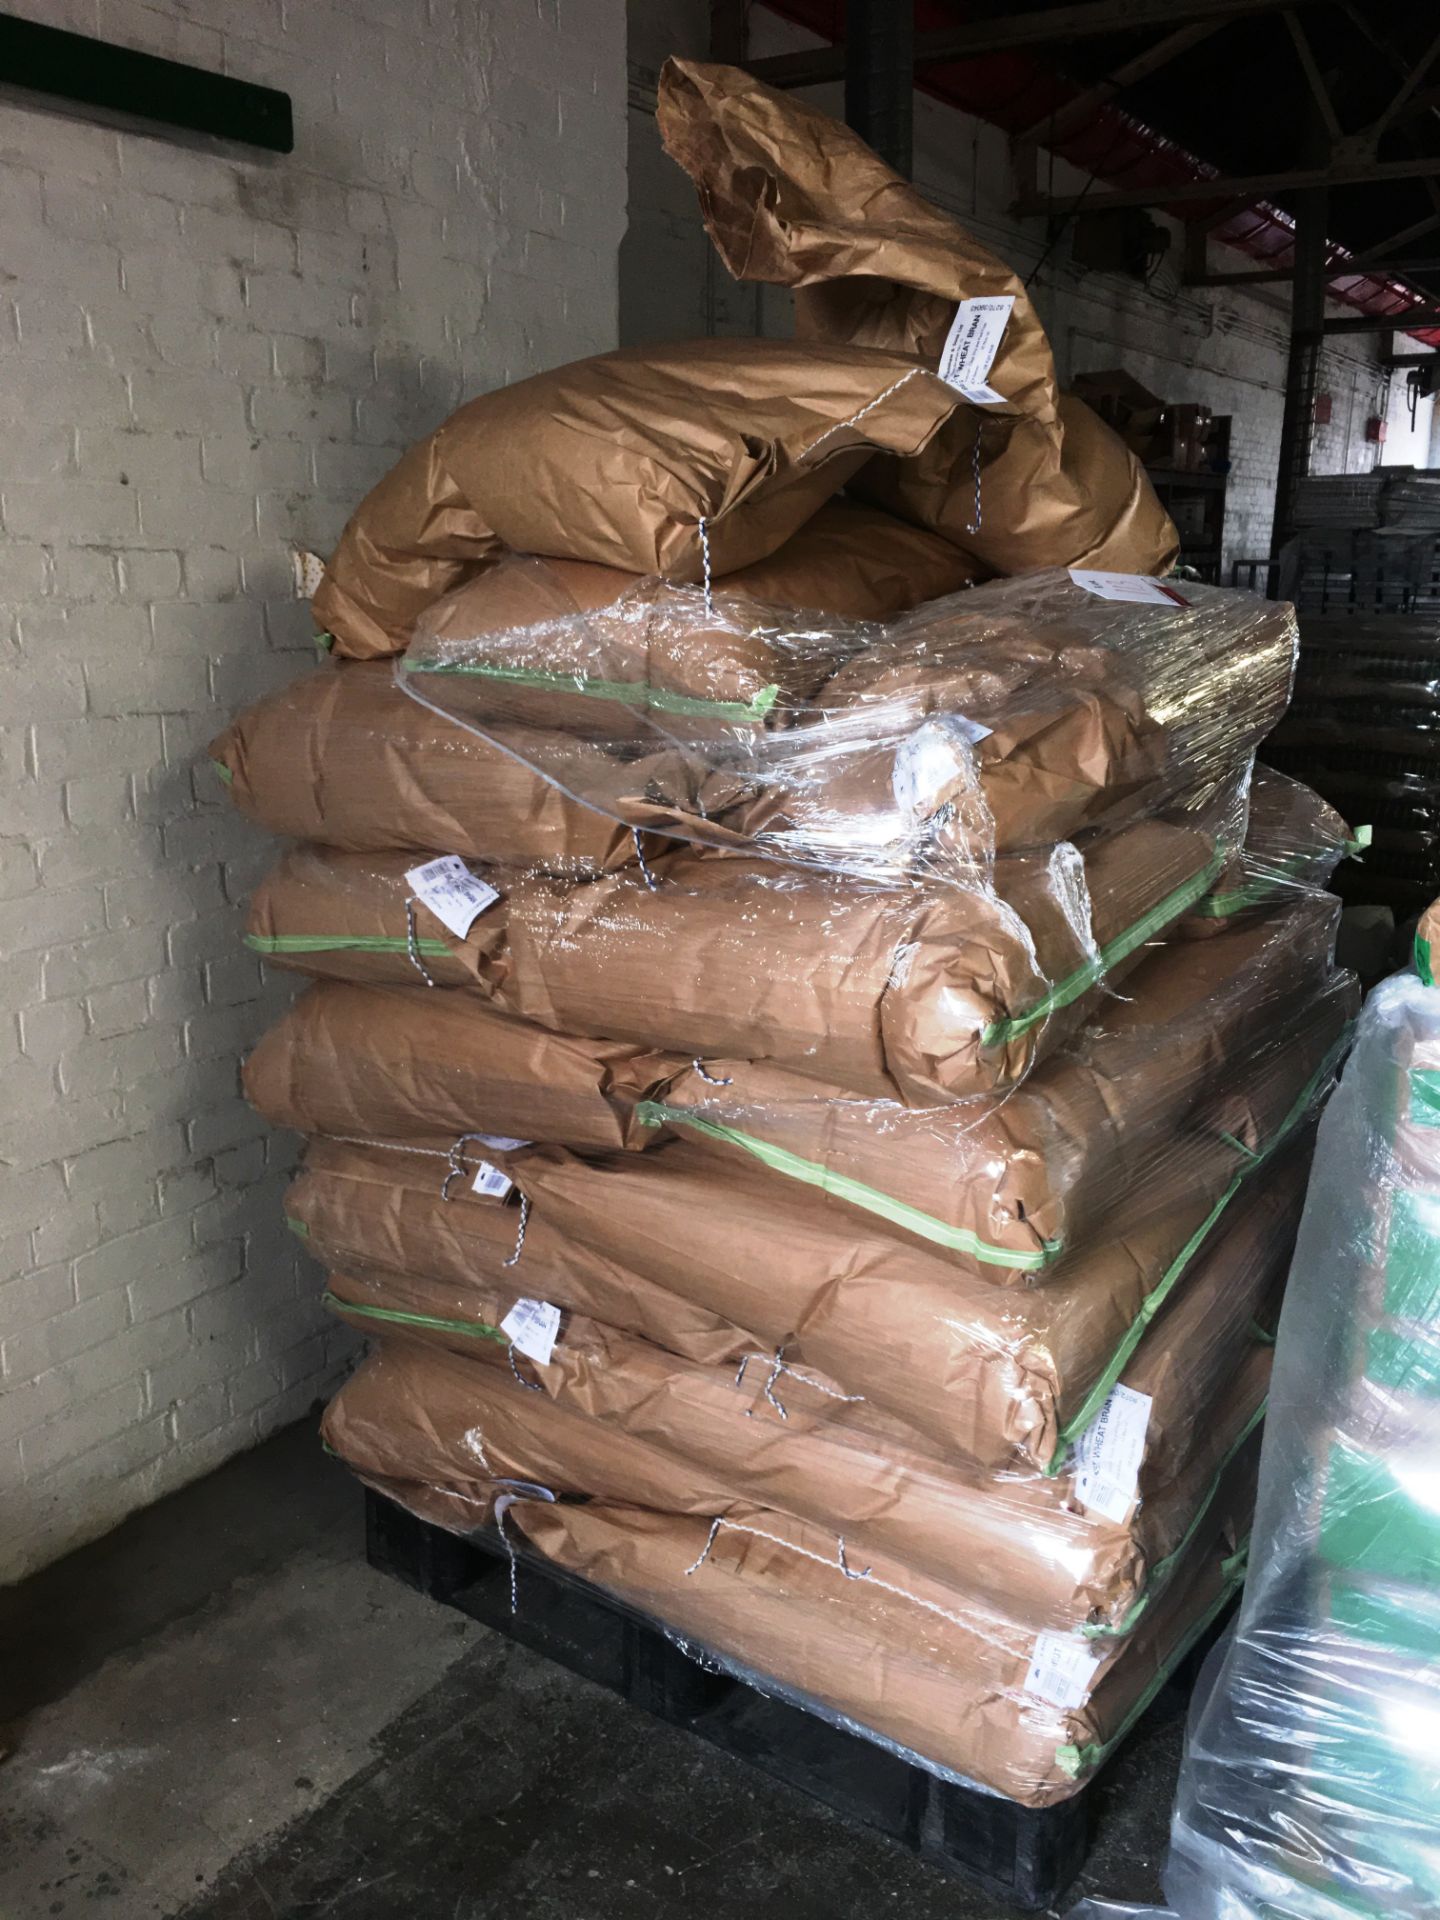 25 x 20kg Bags of Wheat Bran - PAST BEST BEFORE DATE